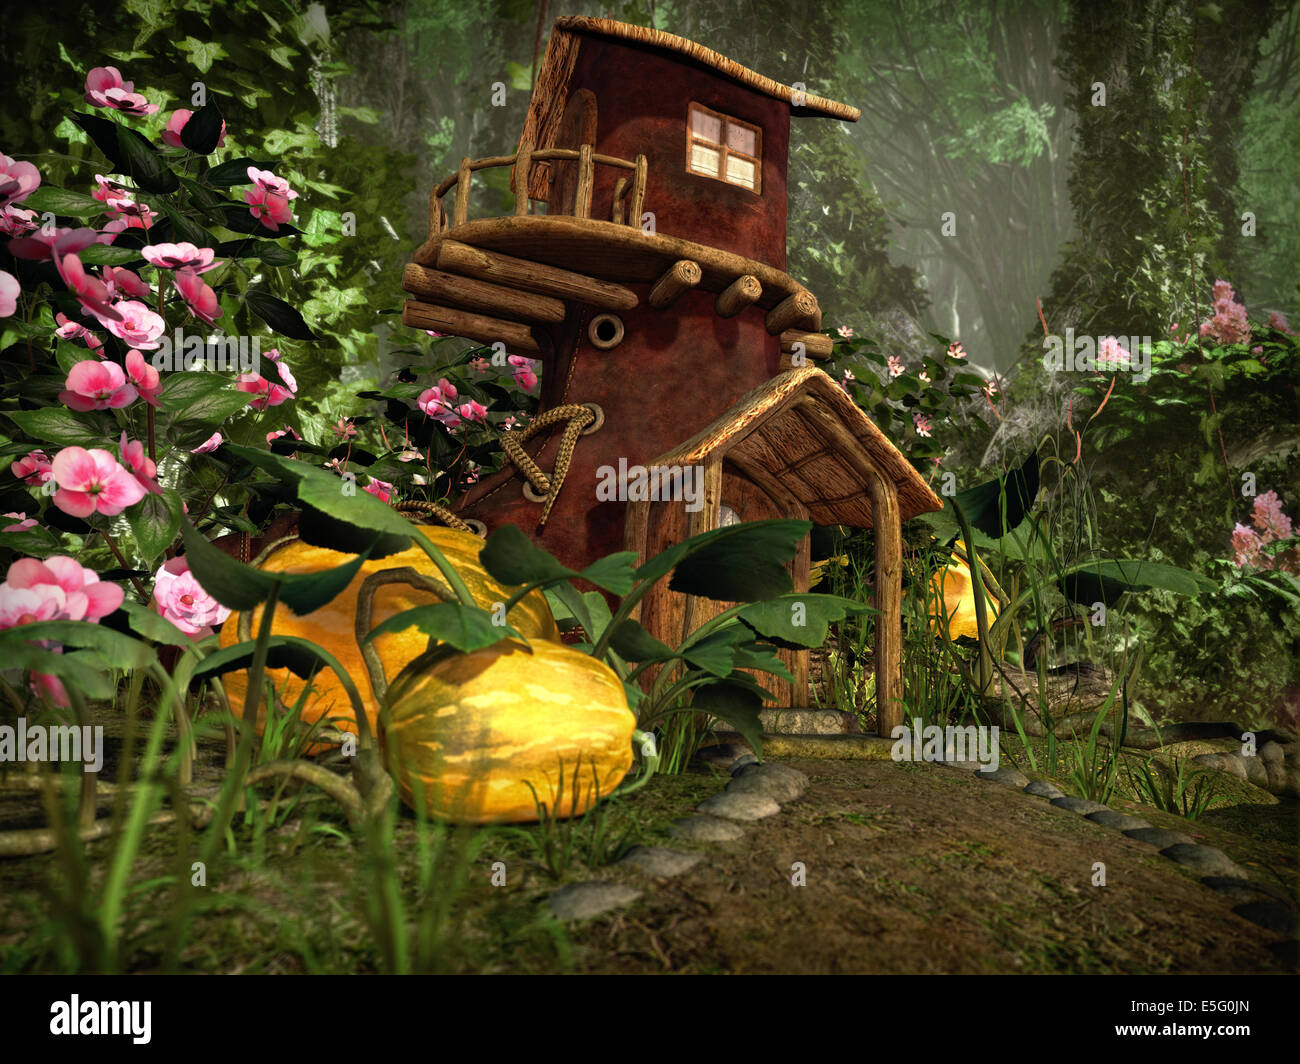 3d computer graphics of a boot house, which stands in a garden with pumpkins Stock Photo